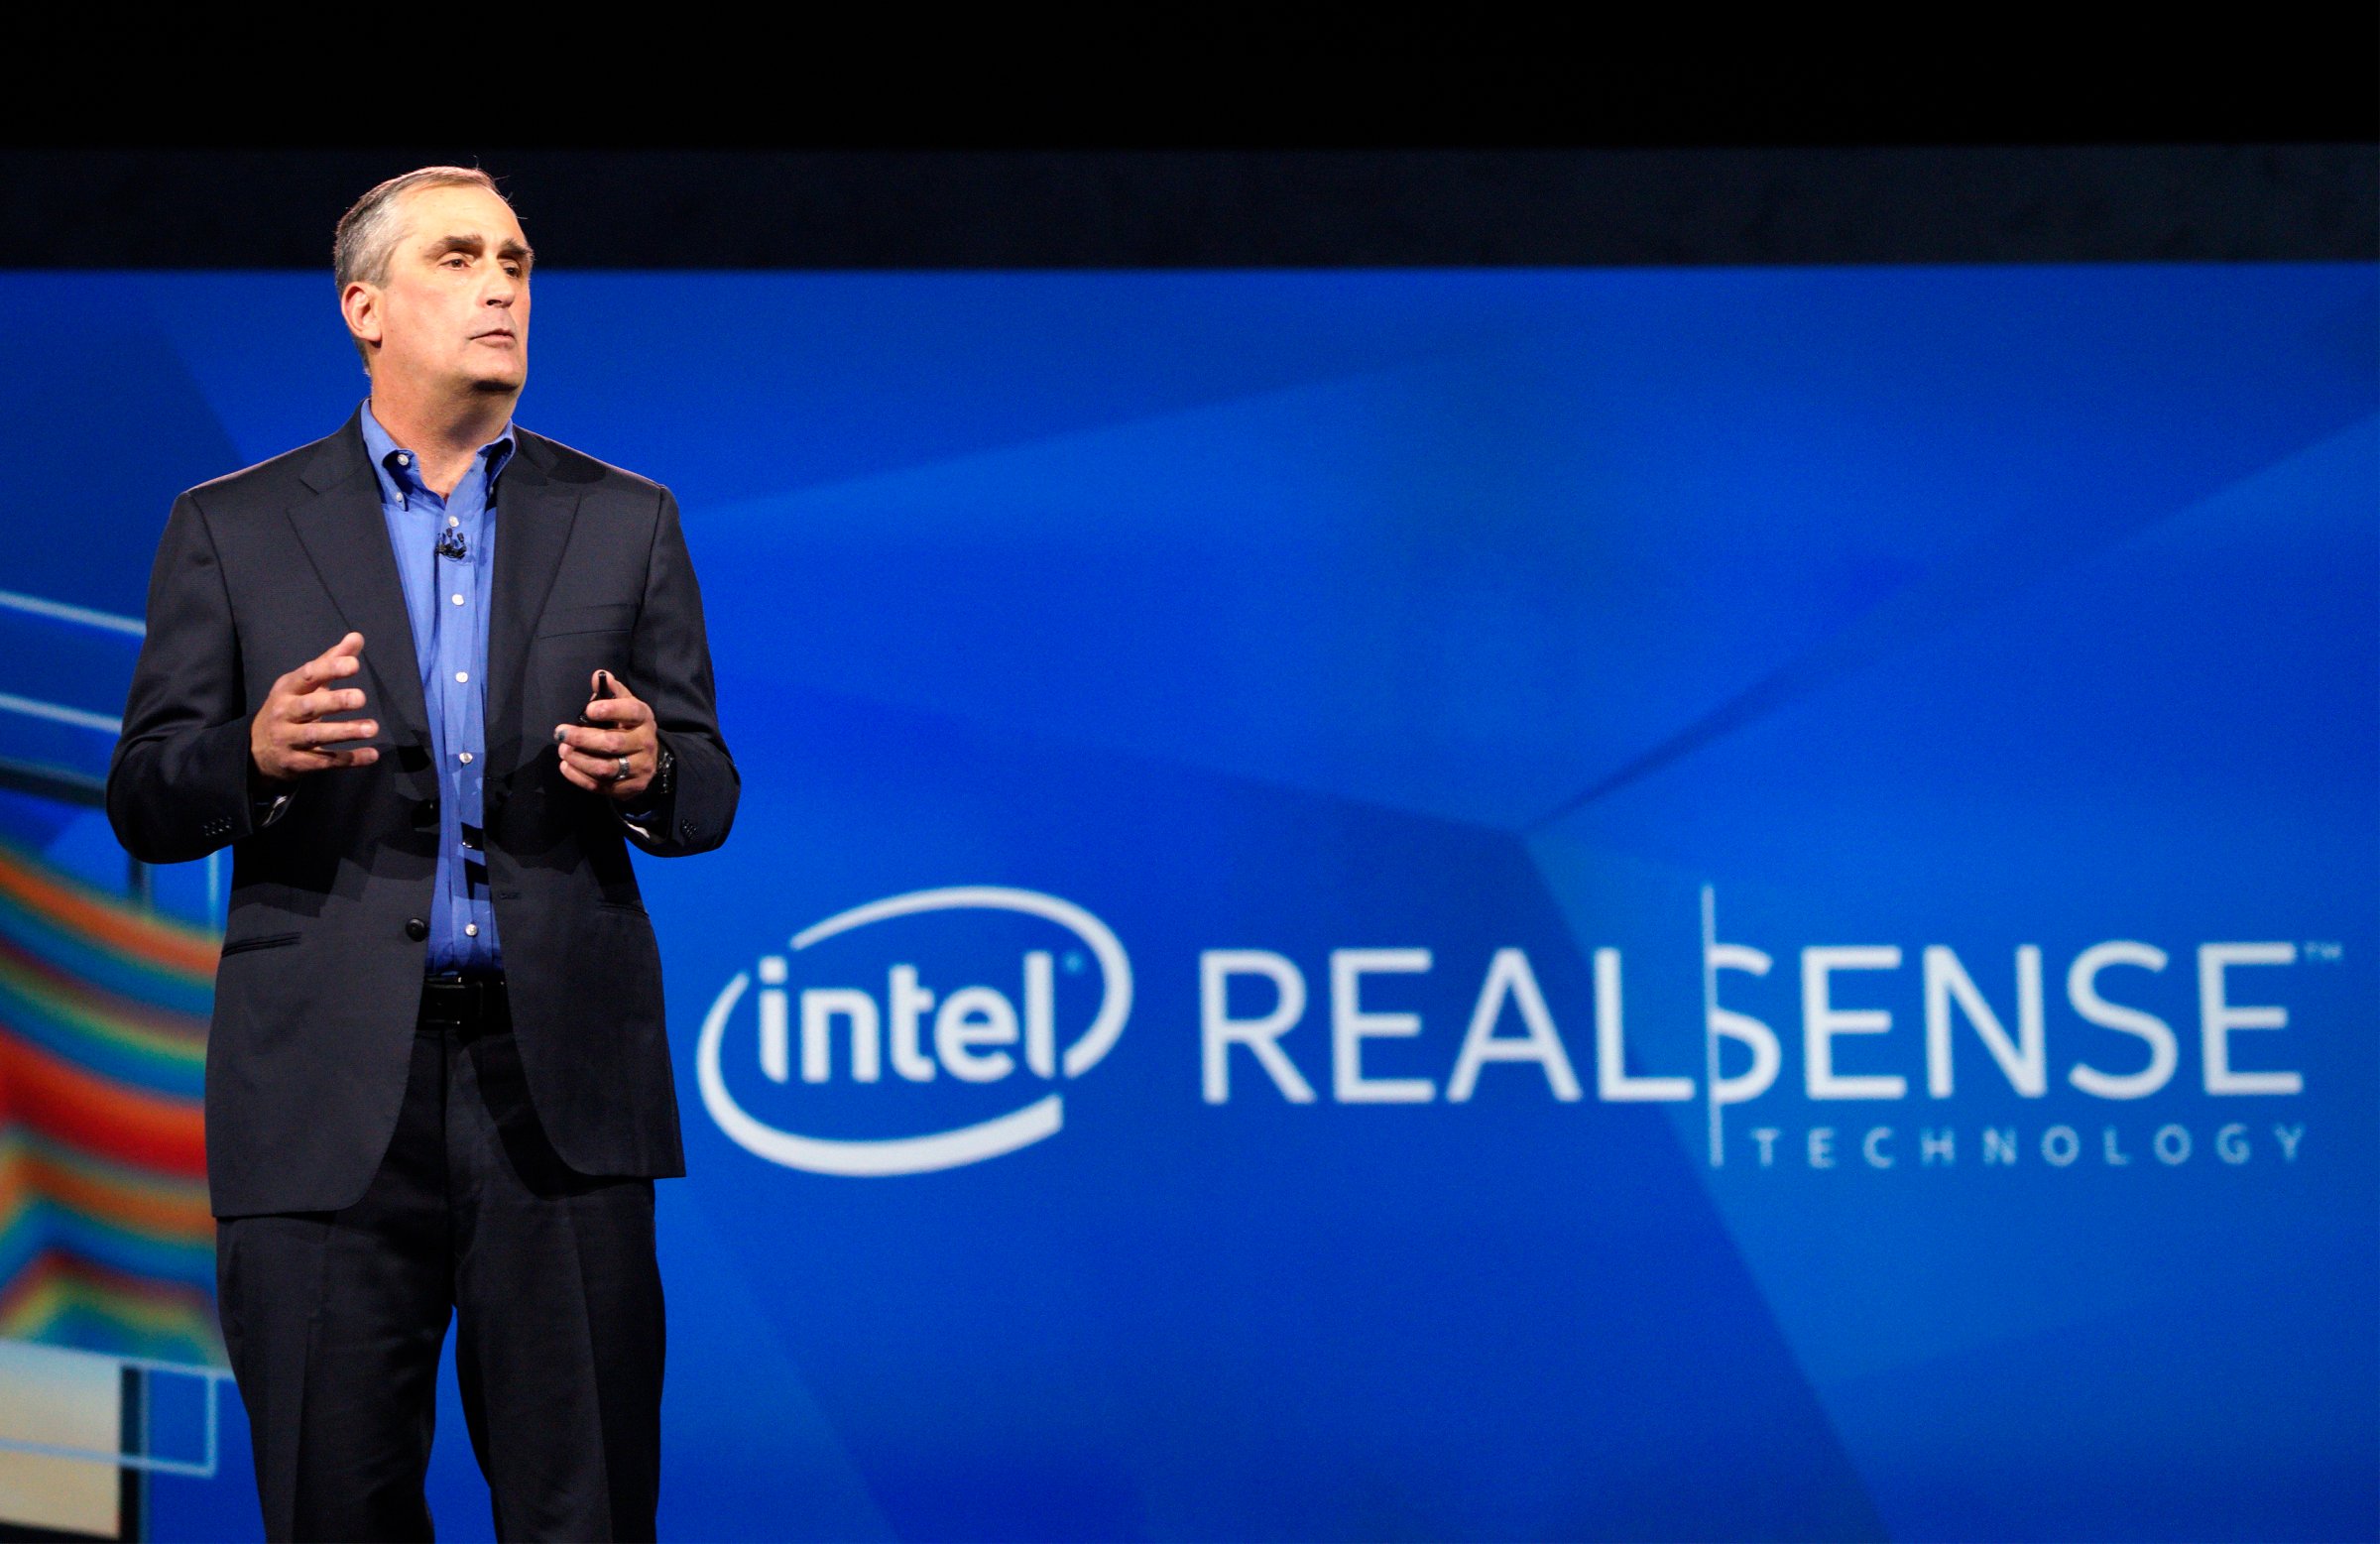 Krzanich, CEO of Intel, talks about the company's RealSense camera technology at his keynote at the International Consumer Electronics show in Las Vegas